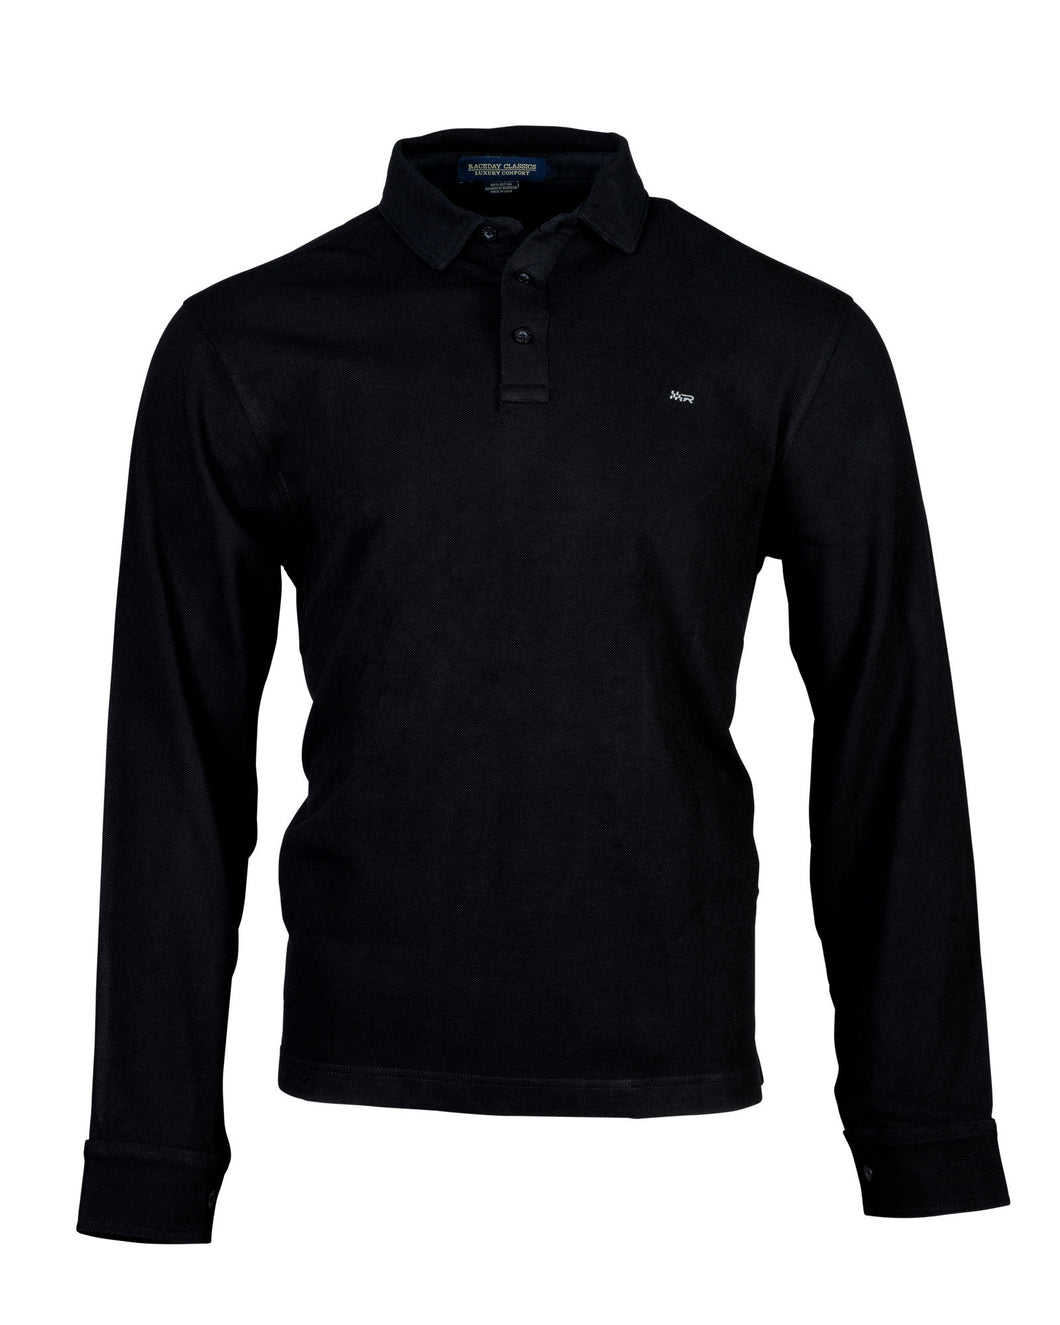 Luxury Black Polo, Long Sleeves, Perfect Collars, Thick Cotton, Regular Fit